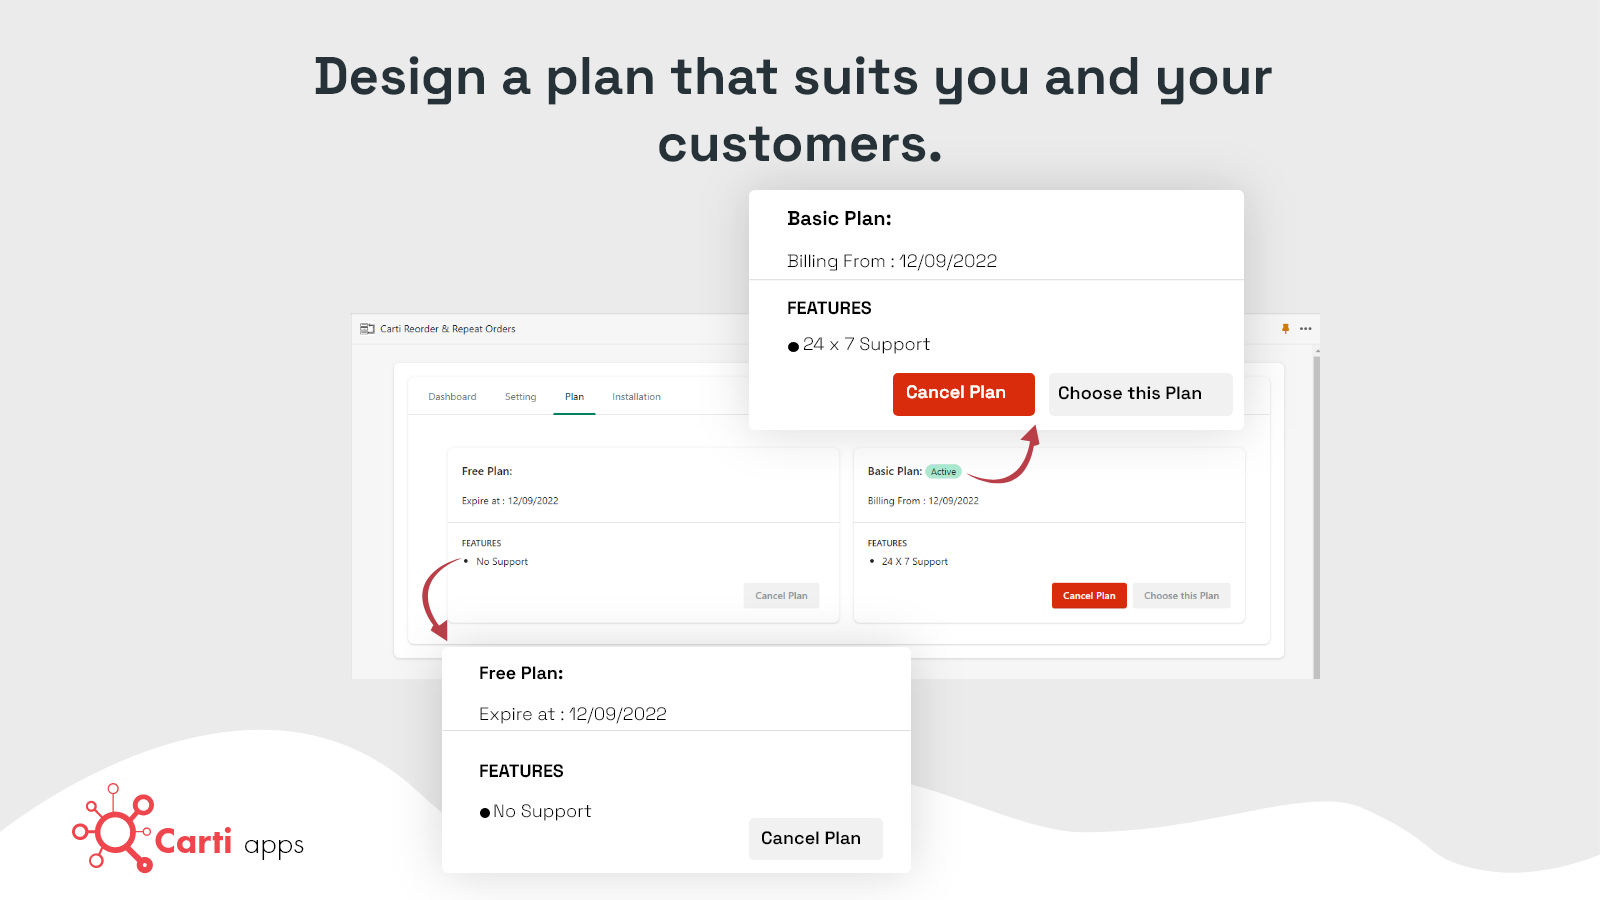 Design a plan that suits you and your customers.